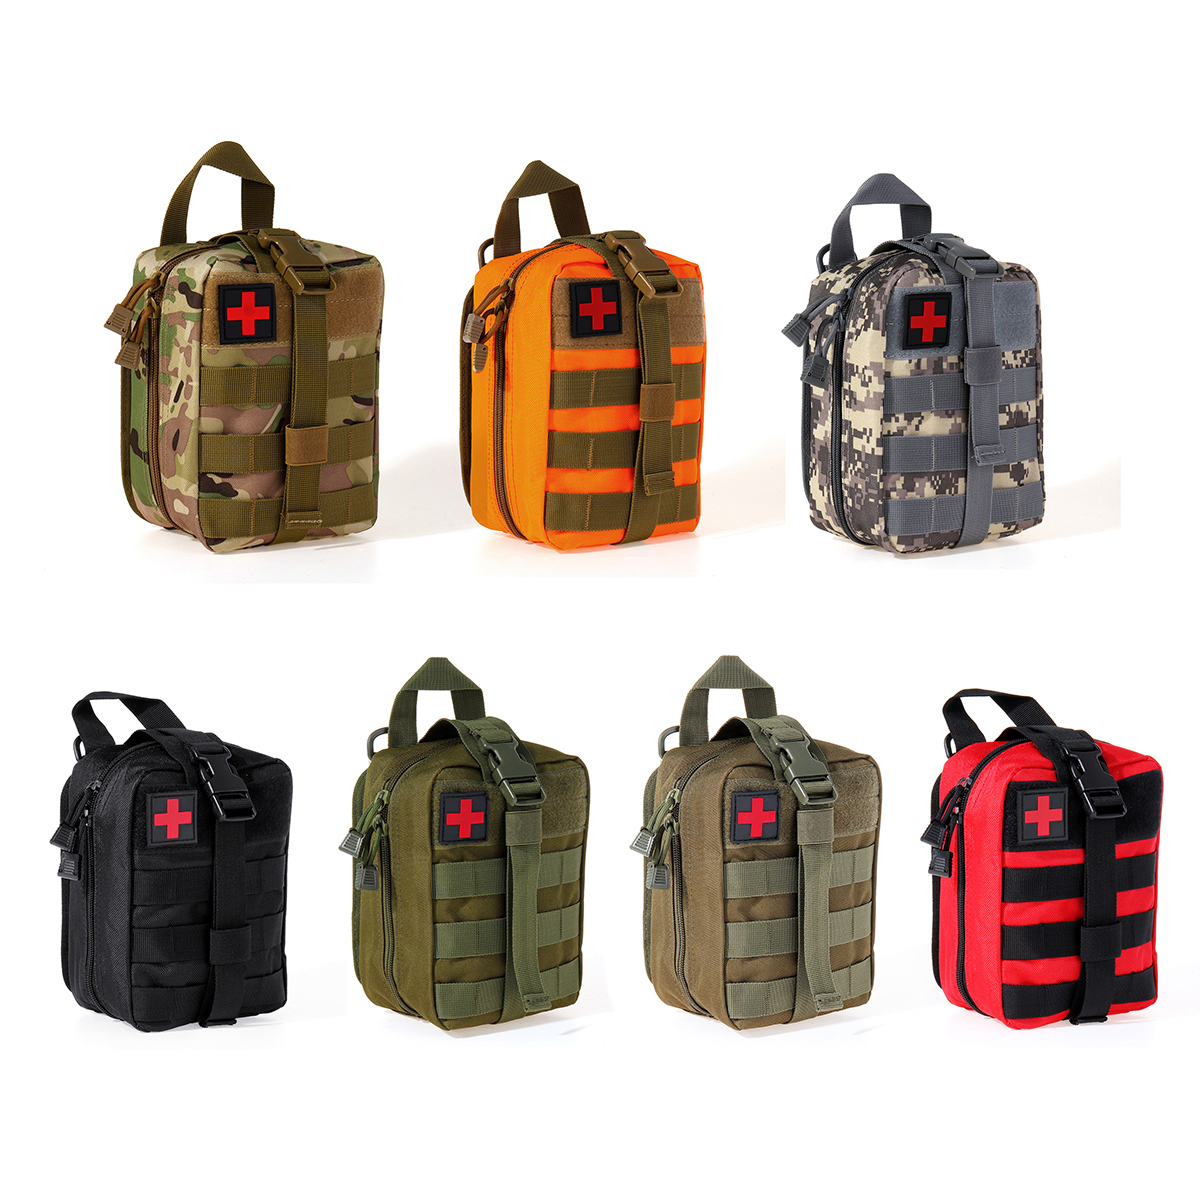 

EMT Emergency Rescue Survival Pouch Climbing Bag Medical Package Tactical Molle 7Colors First Aid Kit Bag